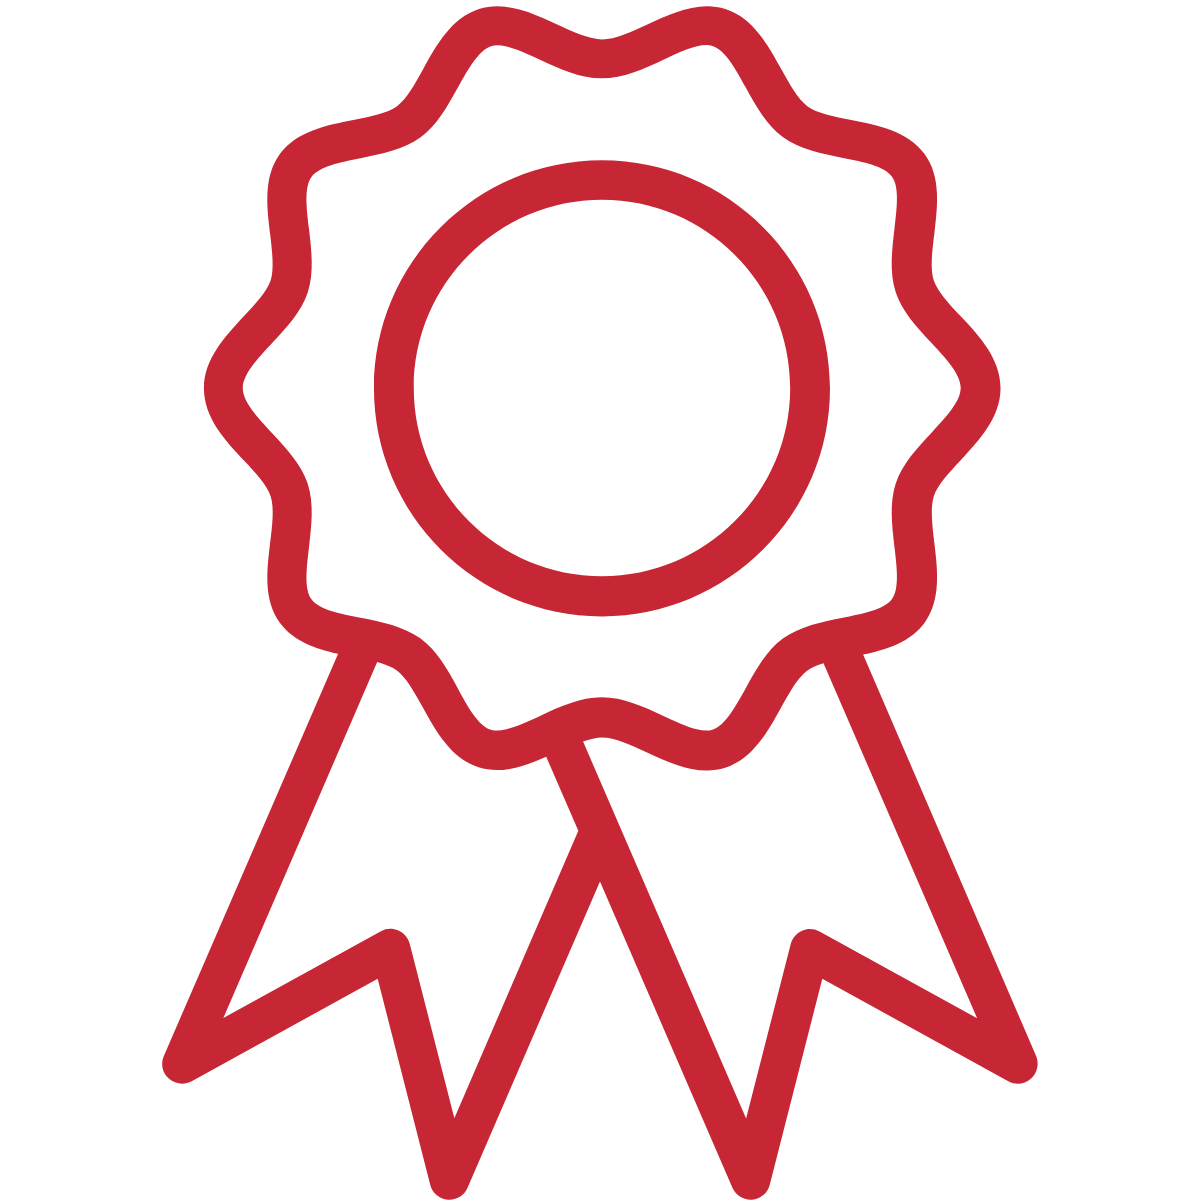 Red and black badge ribbon icon.